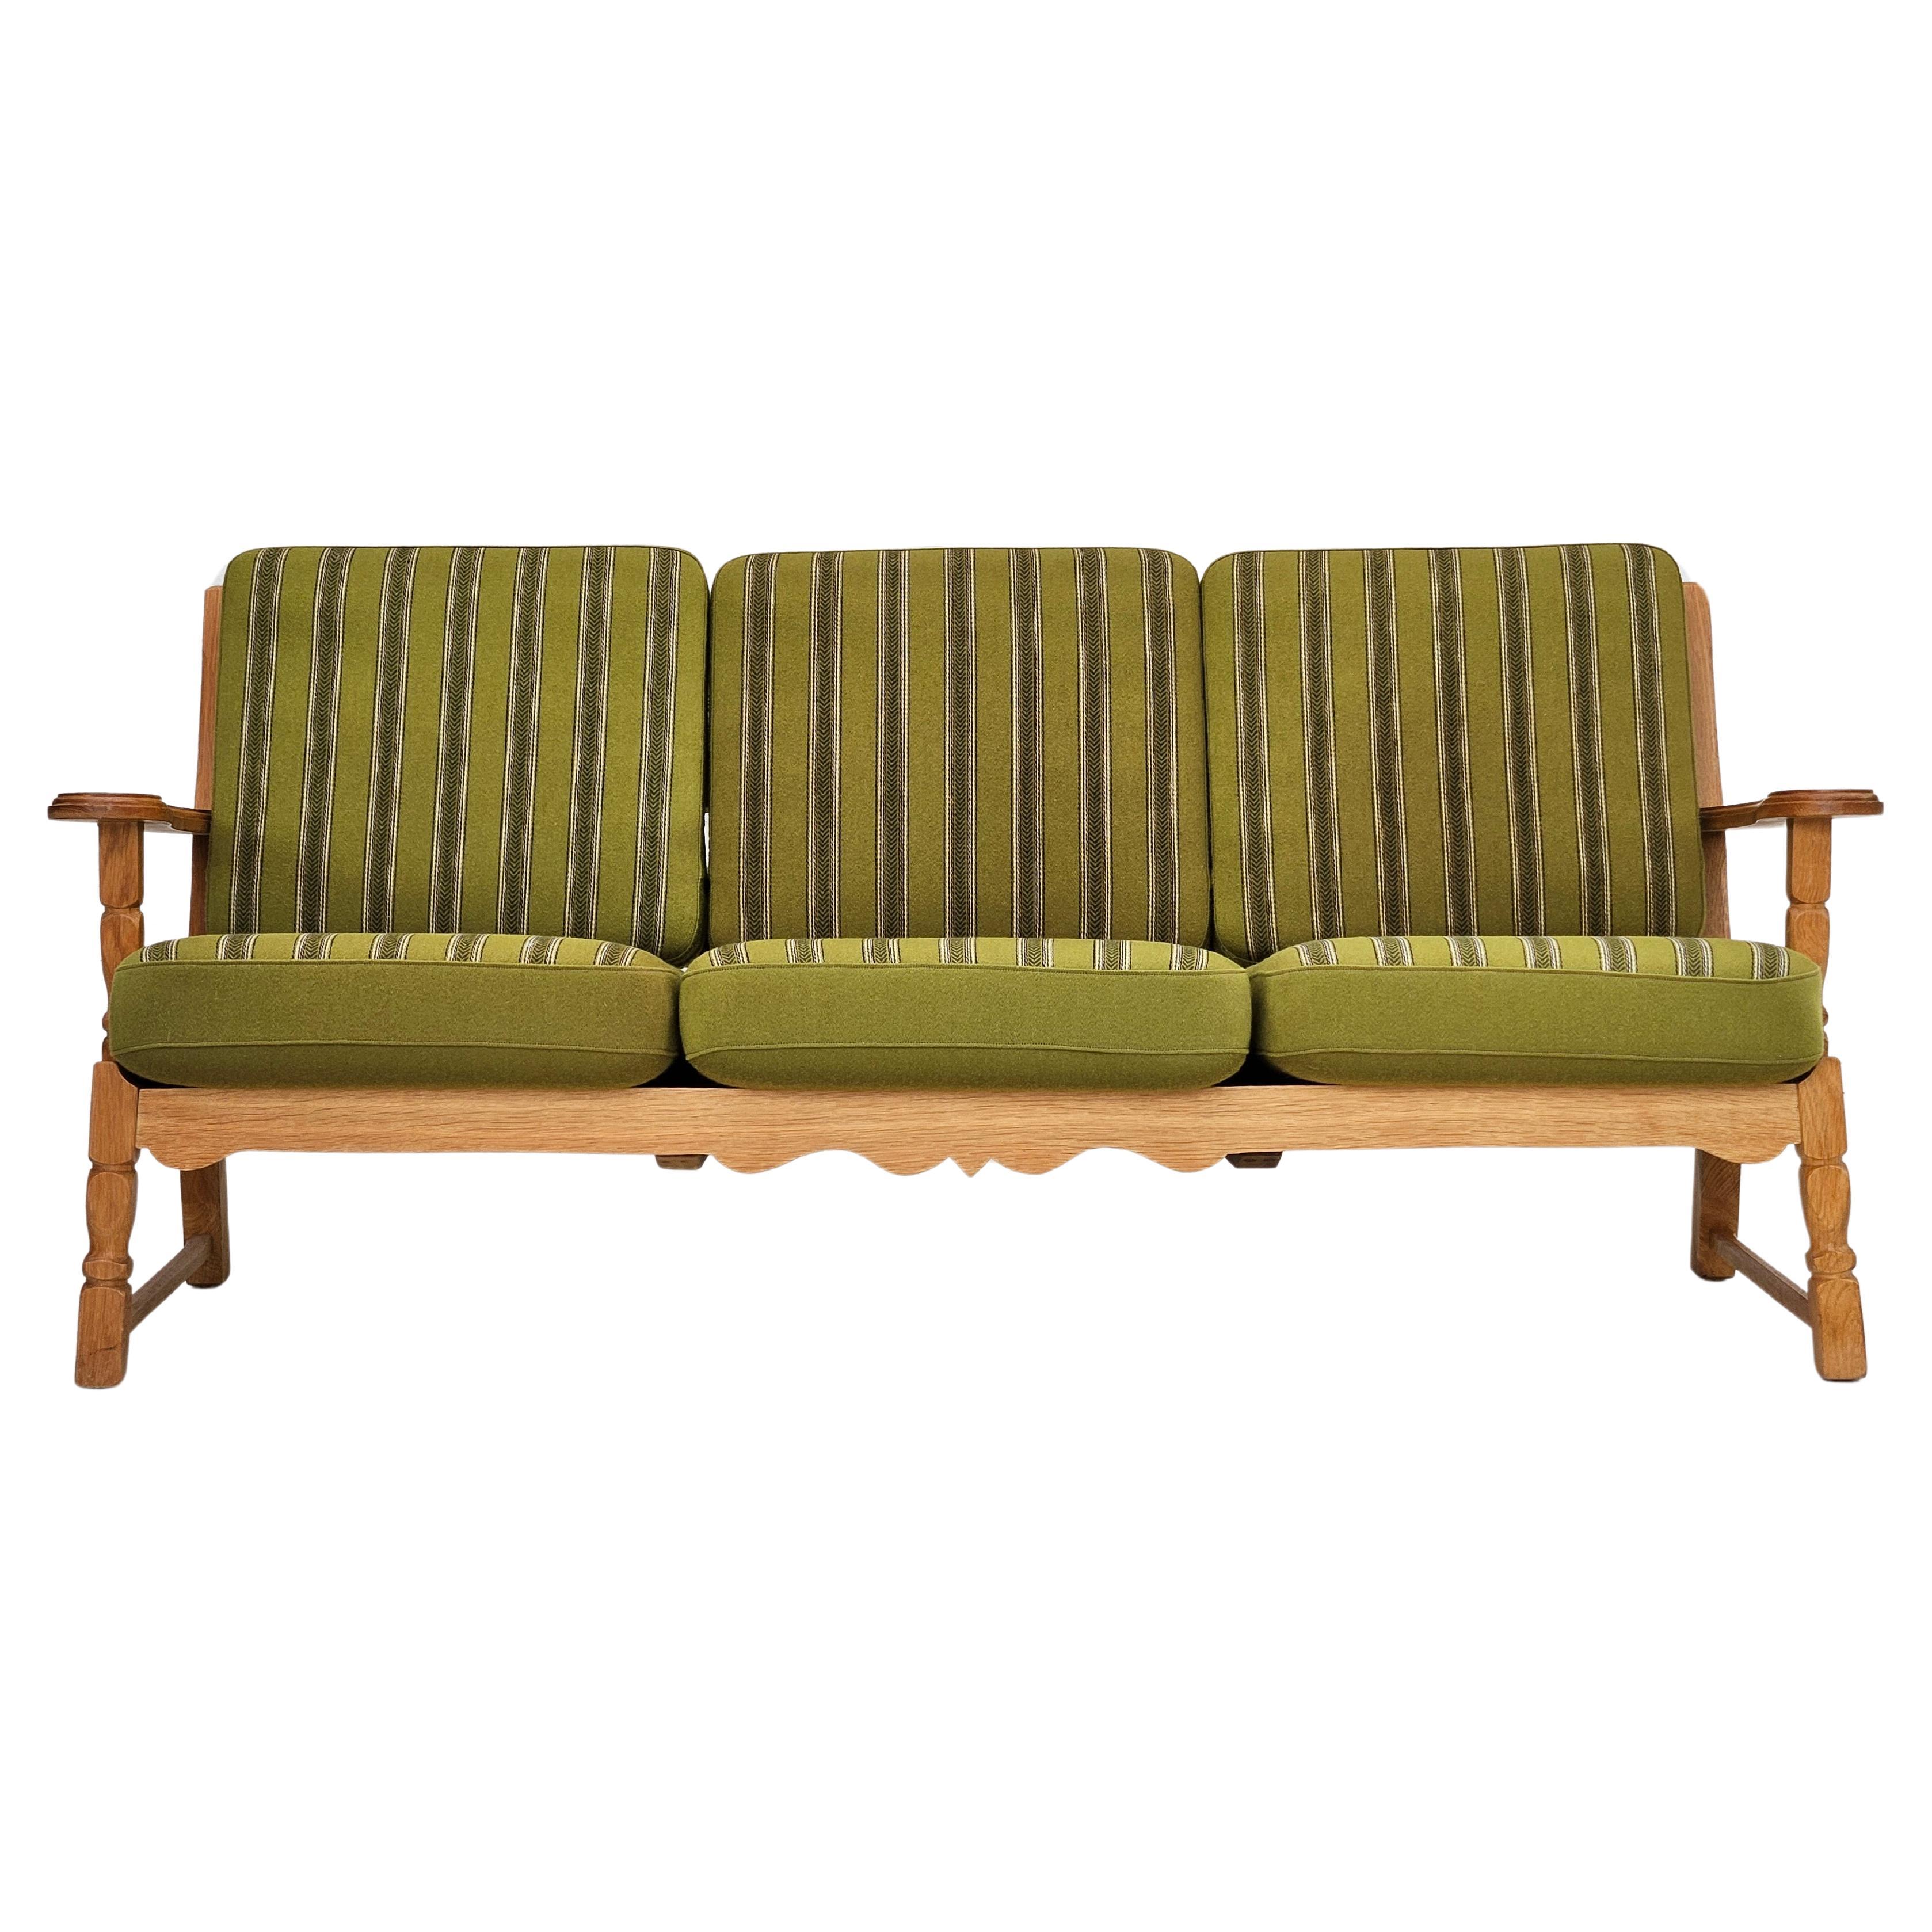 1970s, Danish design, 3 seater sofa in original very good condition: no smells and no stains. Lightly laquiered solid oak wood, furniture wool fabric. Springs in the back and seat cushions. Manufactured by Danish furniture manufacturer in about